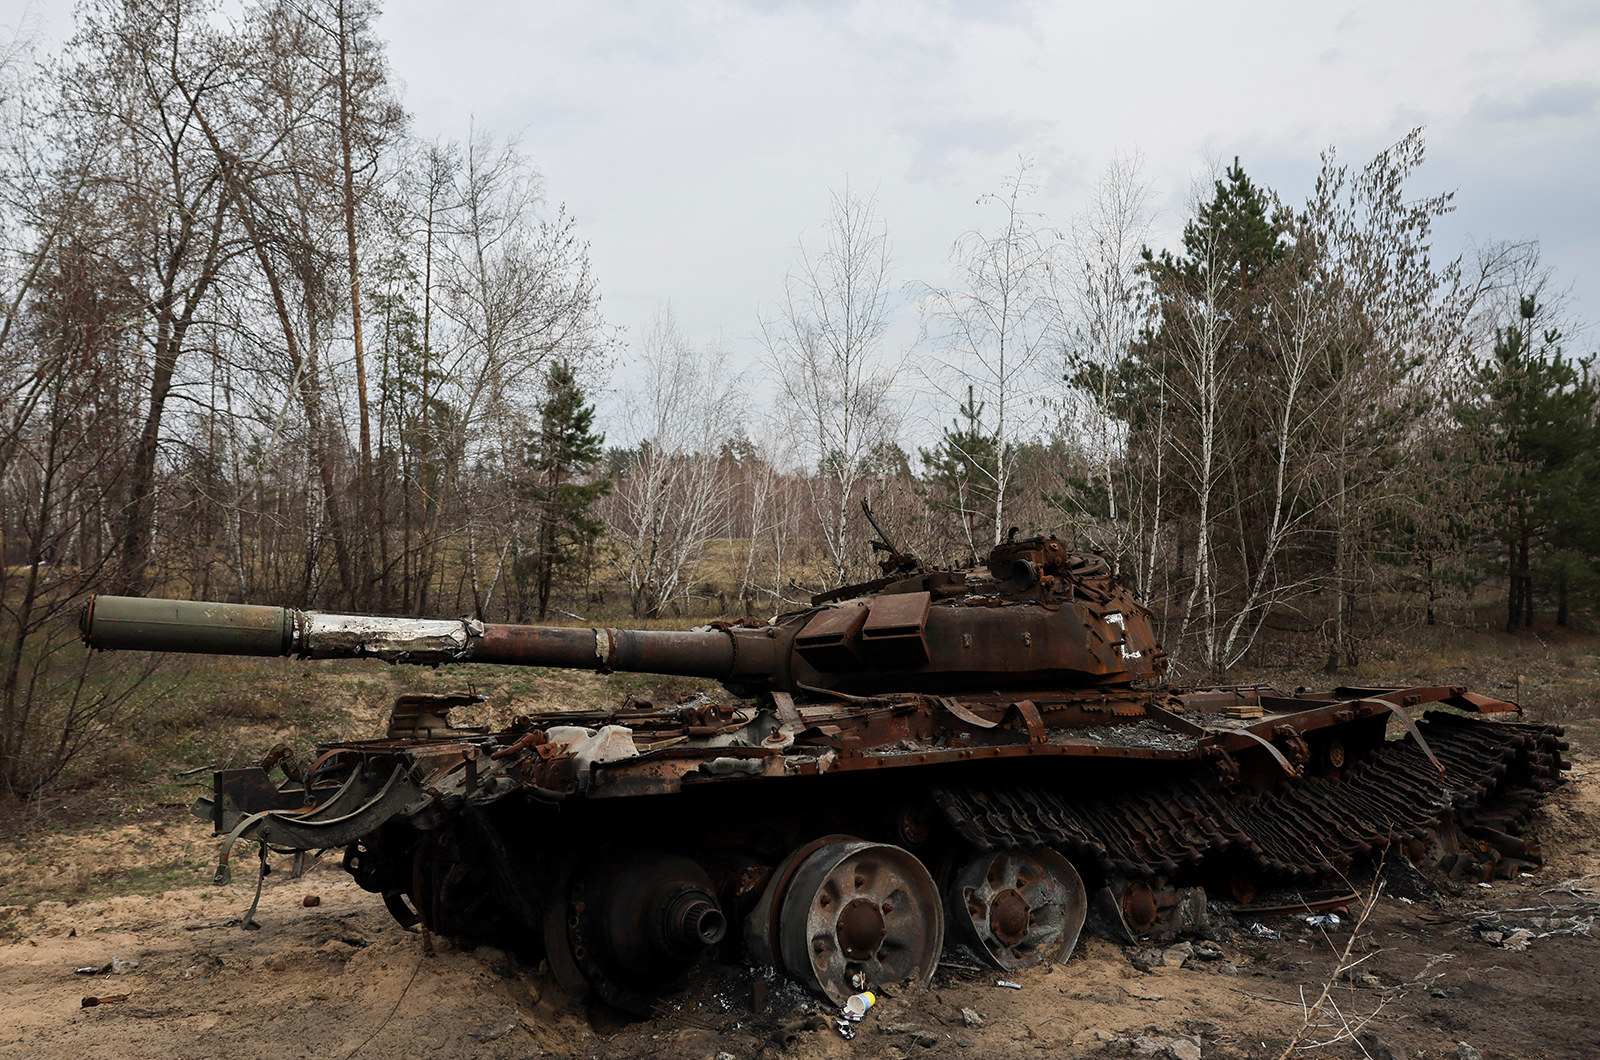 A destroyed Russian tank remains on the side of the road near the frontline town of Kreminna in Luhansk region, Ukraine on March 24.